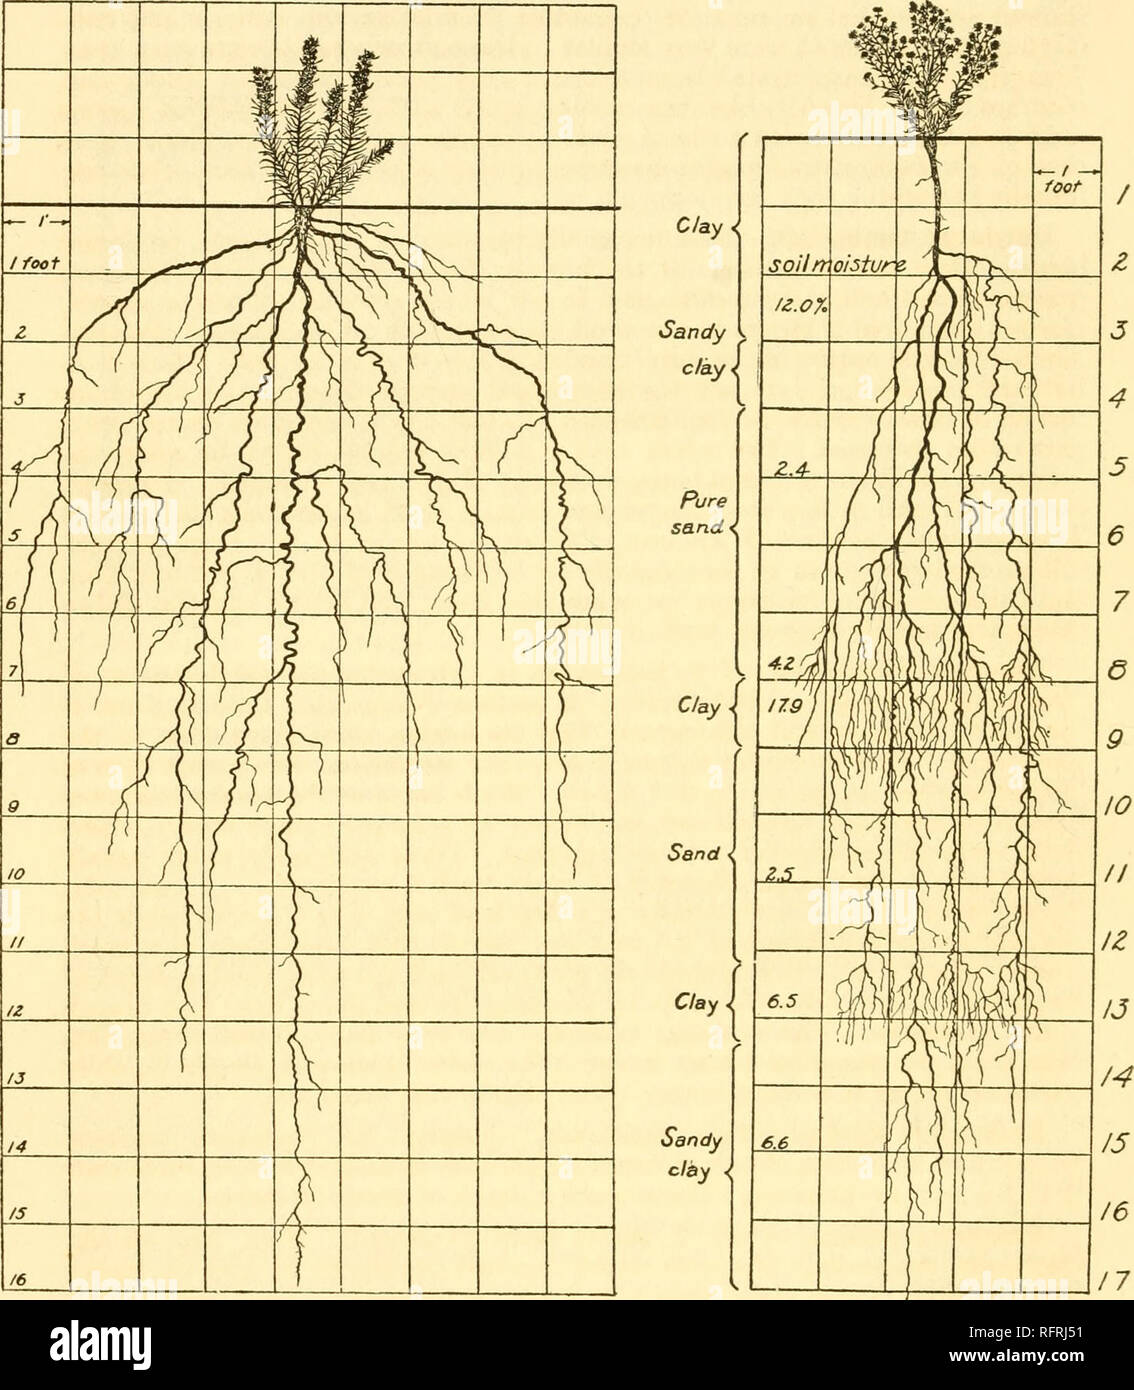 . Carnegie Institution of Washington publication. 10 THE ECOLOGICAL RELATIONS OF ROOTS. This plant has a root system which spreads immediately below the sm-face. Many of the numerous small roots pursue an oblique direction and spread from 12 to 18 inches on either side of the plant before they turn downward. Most of the roots are only about 1 mm. in diameter and poorly branched.. Fig. 2.—Root system of Liatris punctata. Fig. 3.—Root system oiKulmia glulinosa. However, they are very abundant in the first 2 feet of soil, while maximum depths of over 5 feet are attained. They are yellowish-brown  Stock Photo